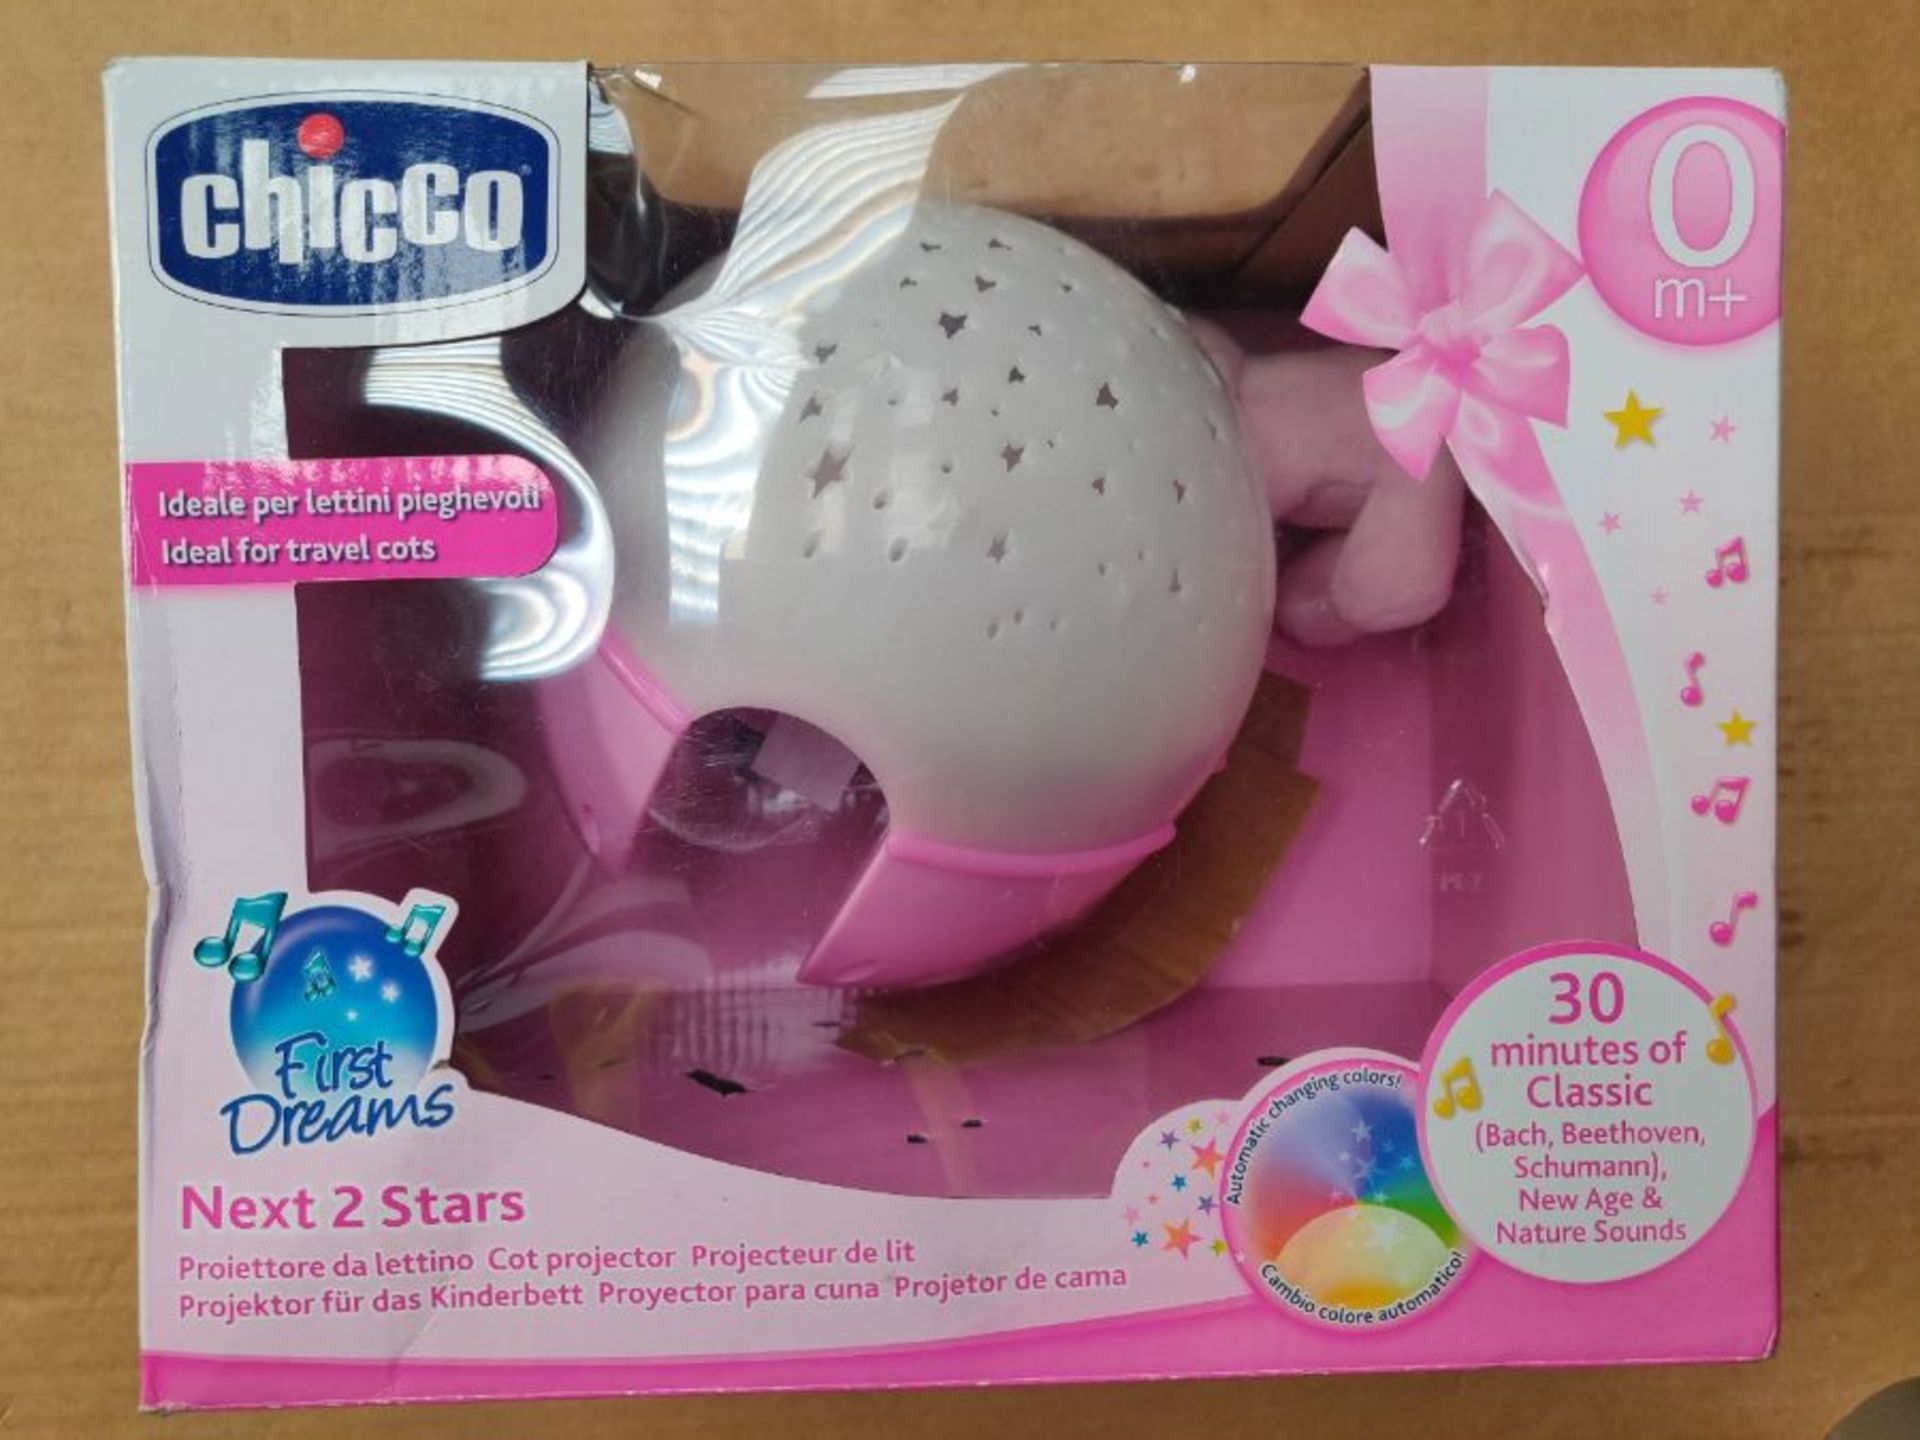 Chicco Next2Stars Baby Night Light with Plush Toy - Star Light Projector for Cots and - Image 2 of 3